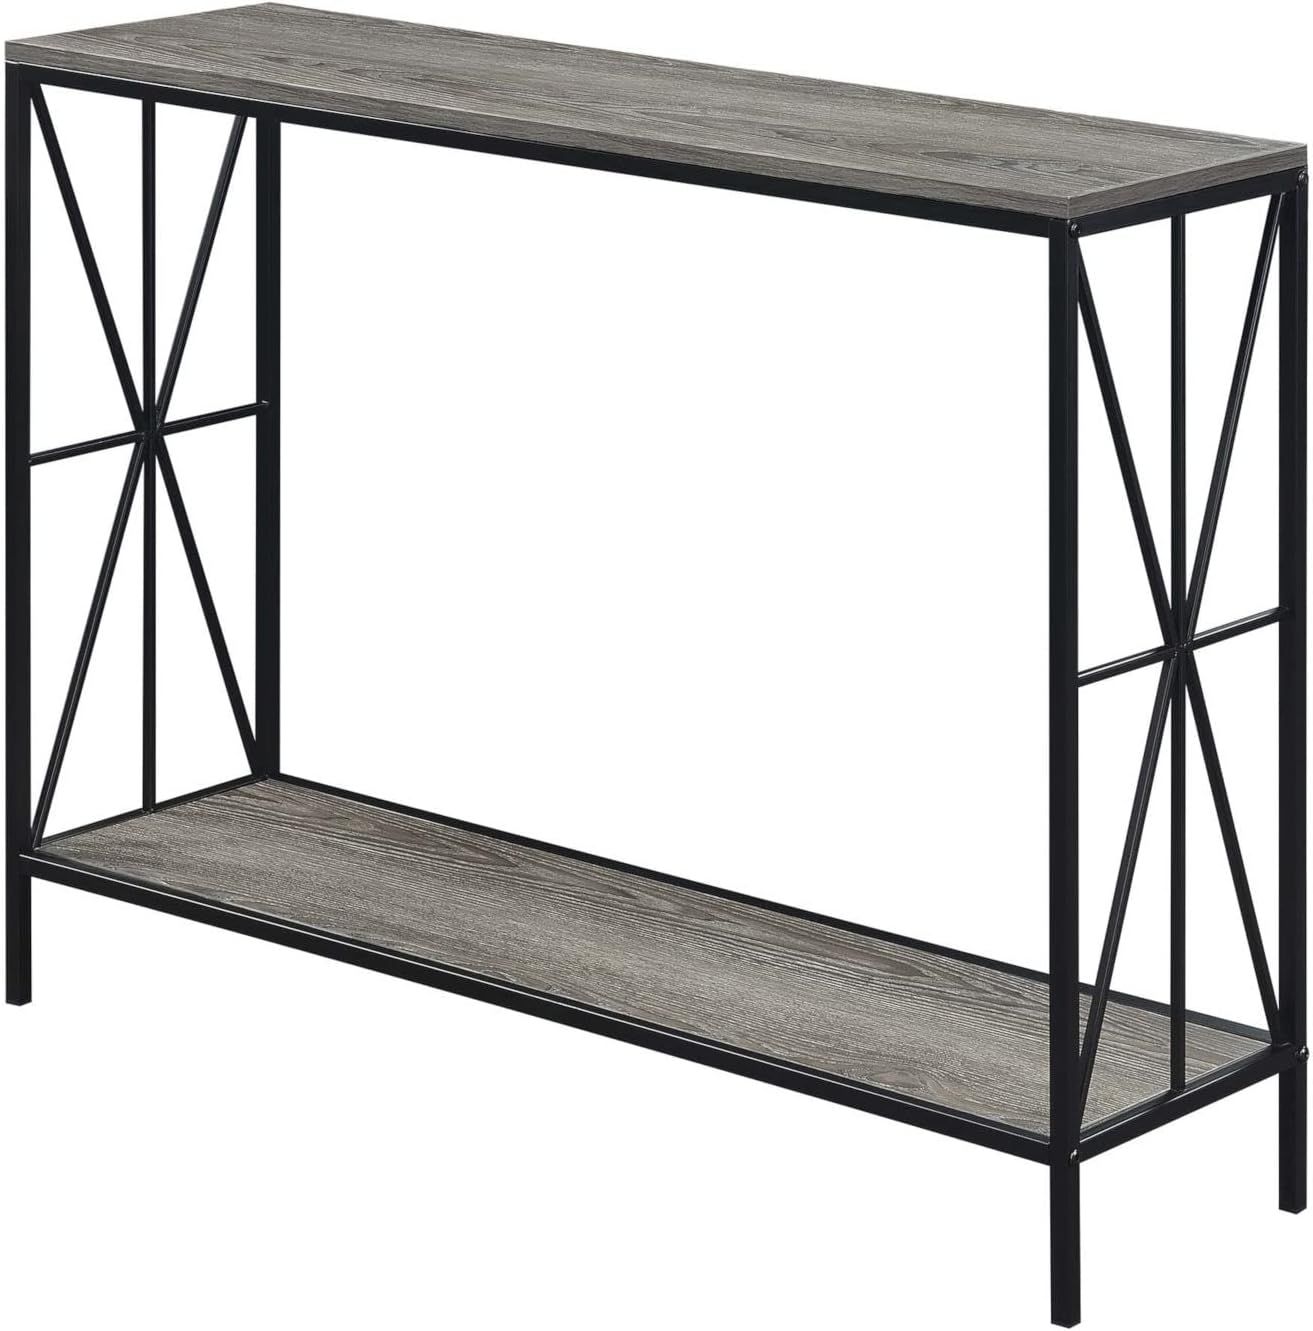 Convenience Concepts Tucson Starburst Console Table with Shelf, Weathered Gray/Black | Amazon (US)